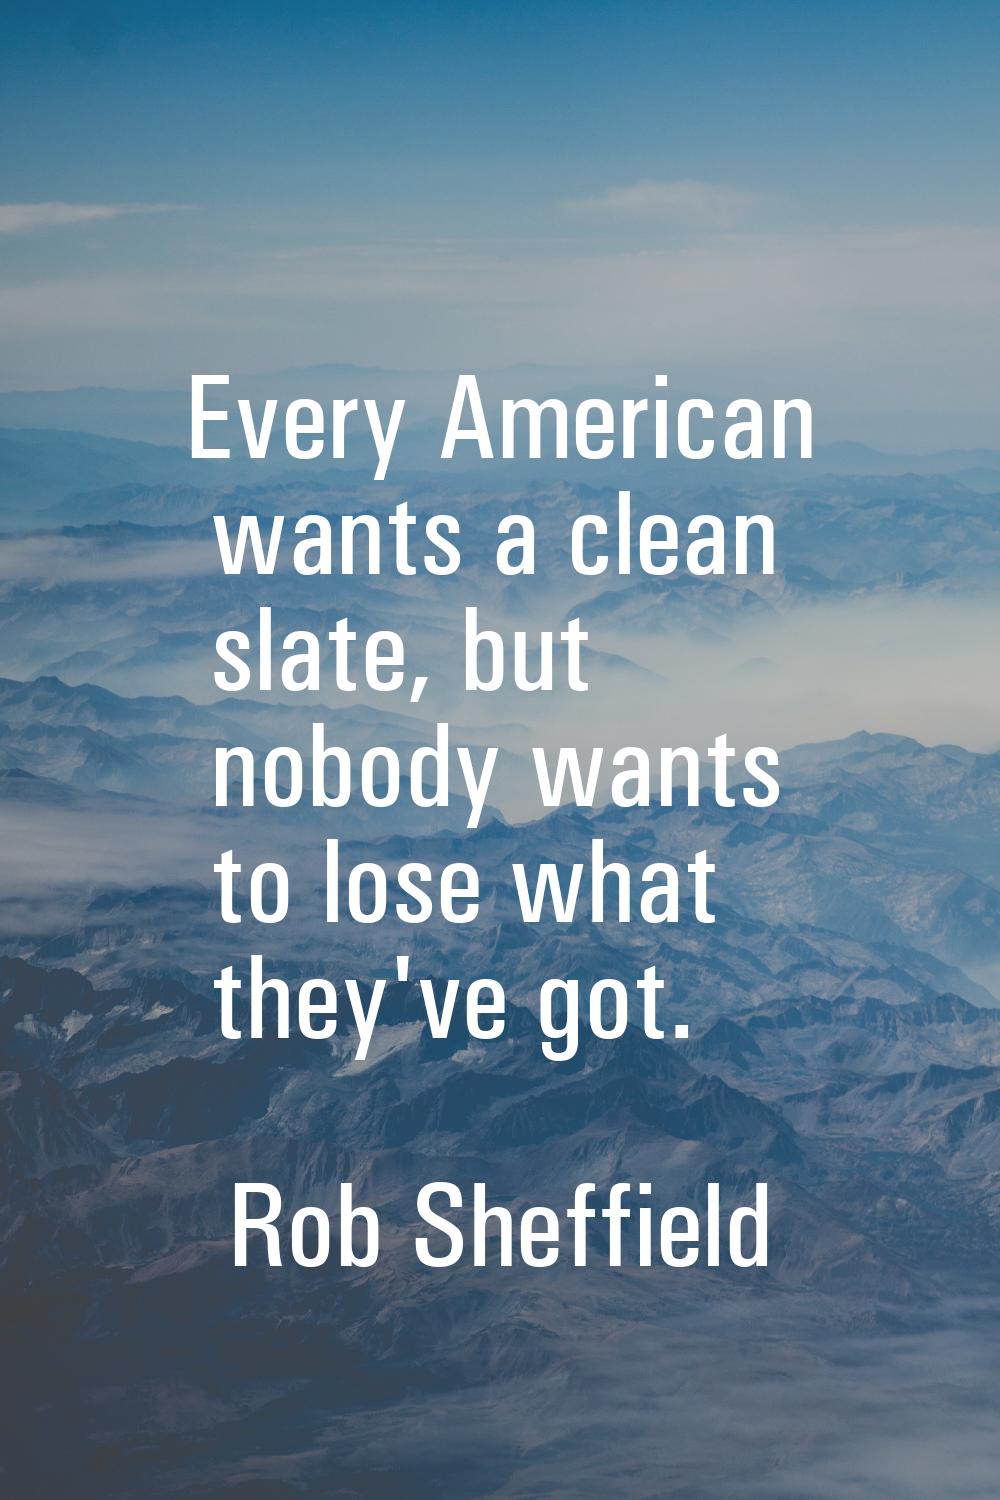 Every American wants a clean slate, but nobody wants to lose what they've got.